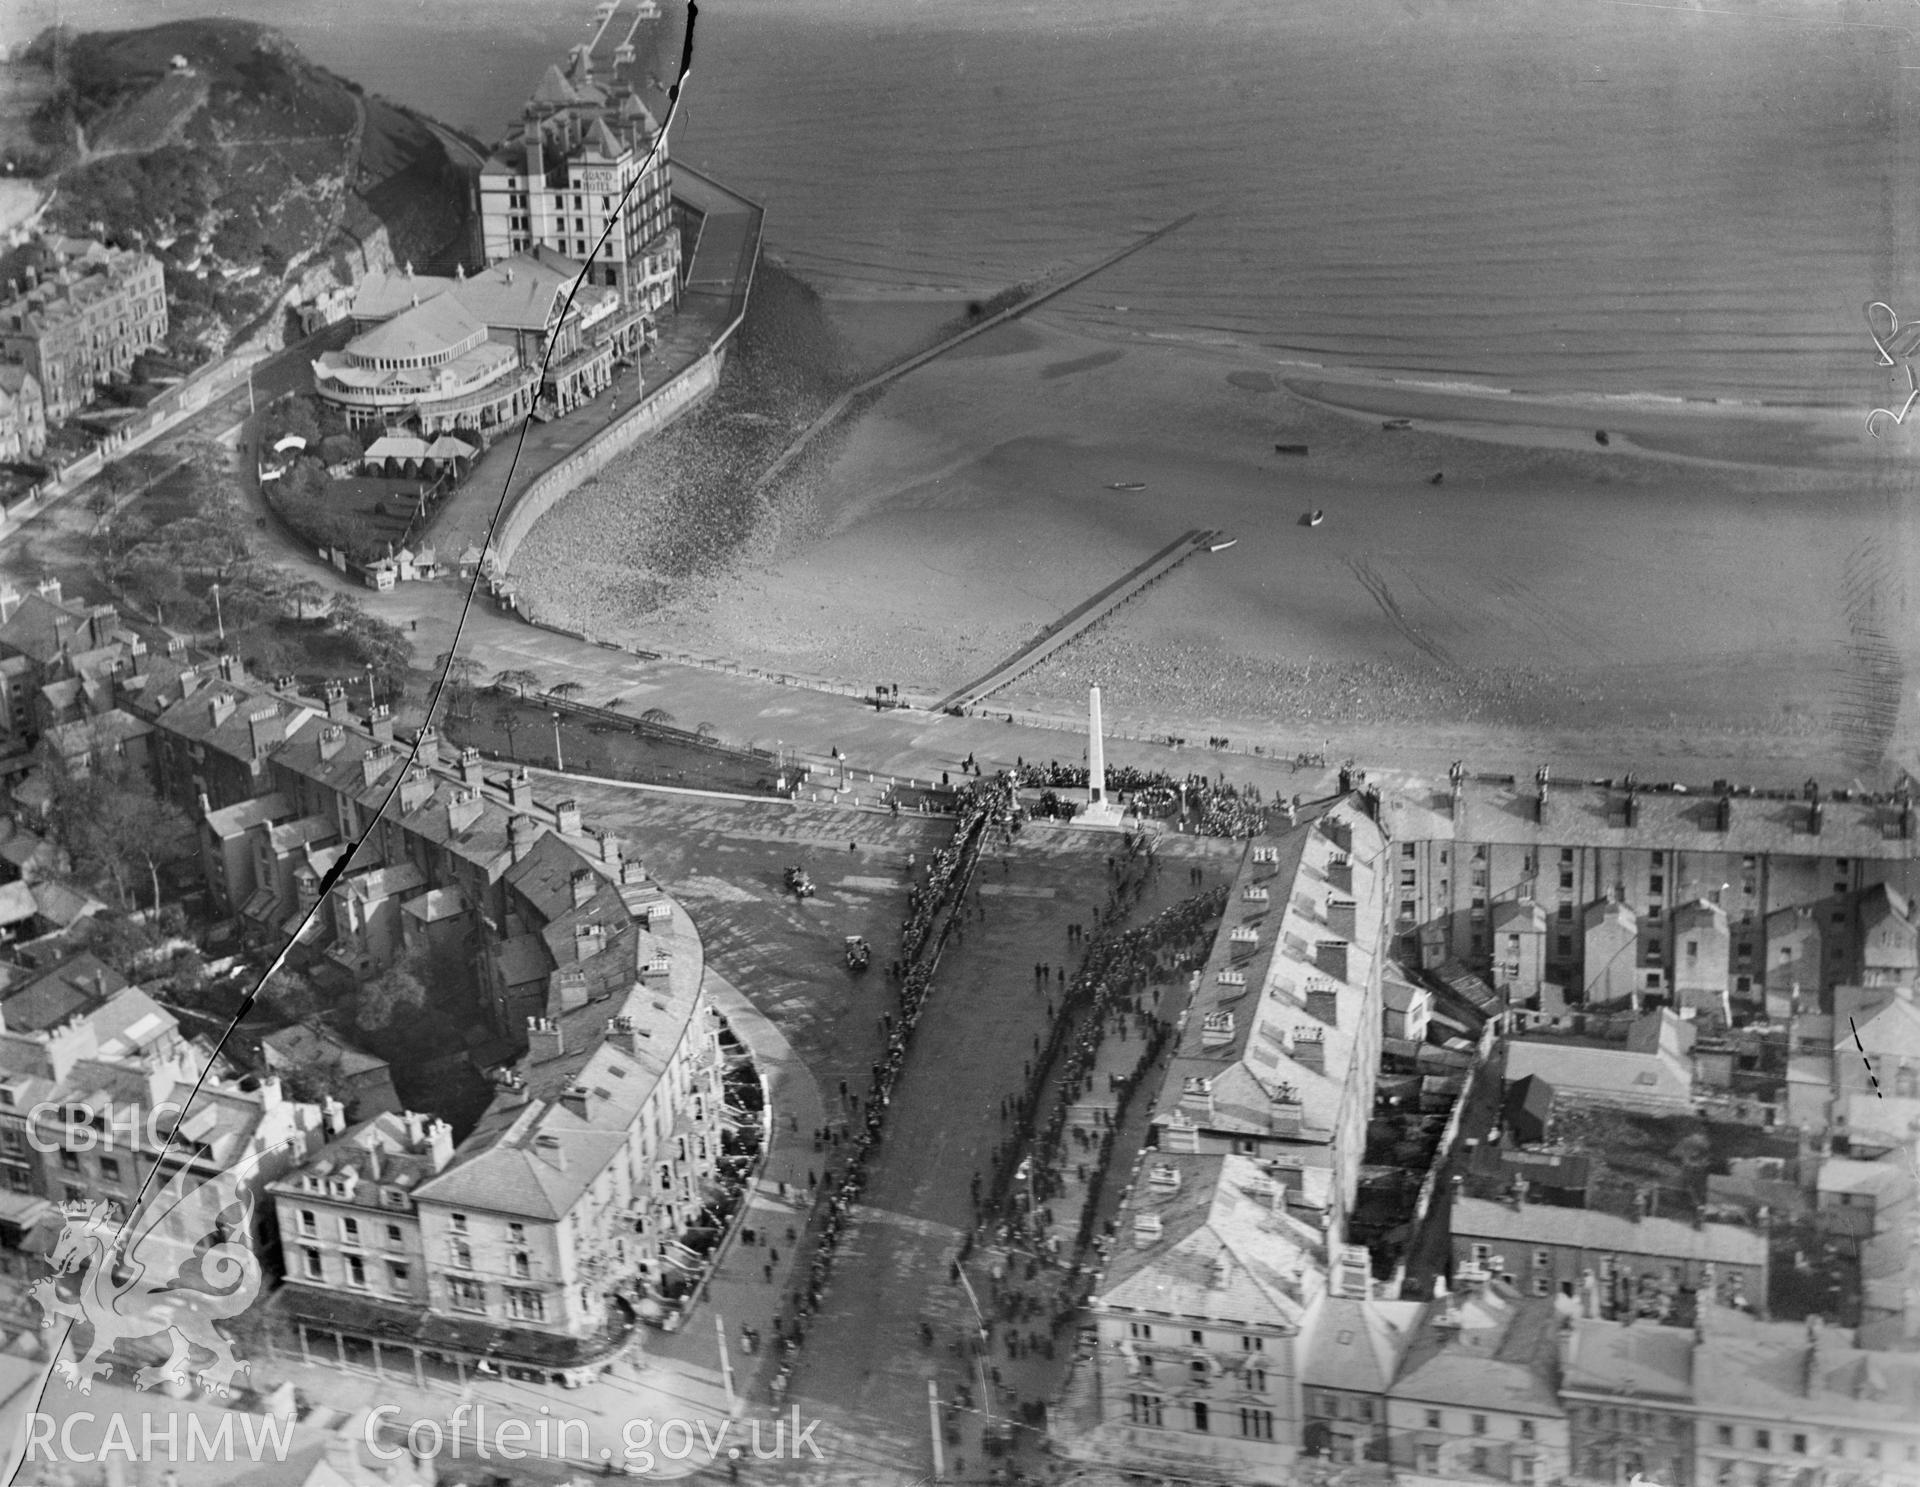 Prince Edward Square, Llandudno, showing the Cenotaph war memorial during ceremony, oblique aerial view. 5?x4? black and white glass plate negative.